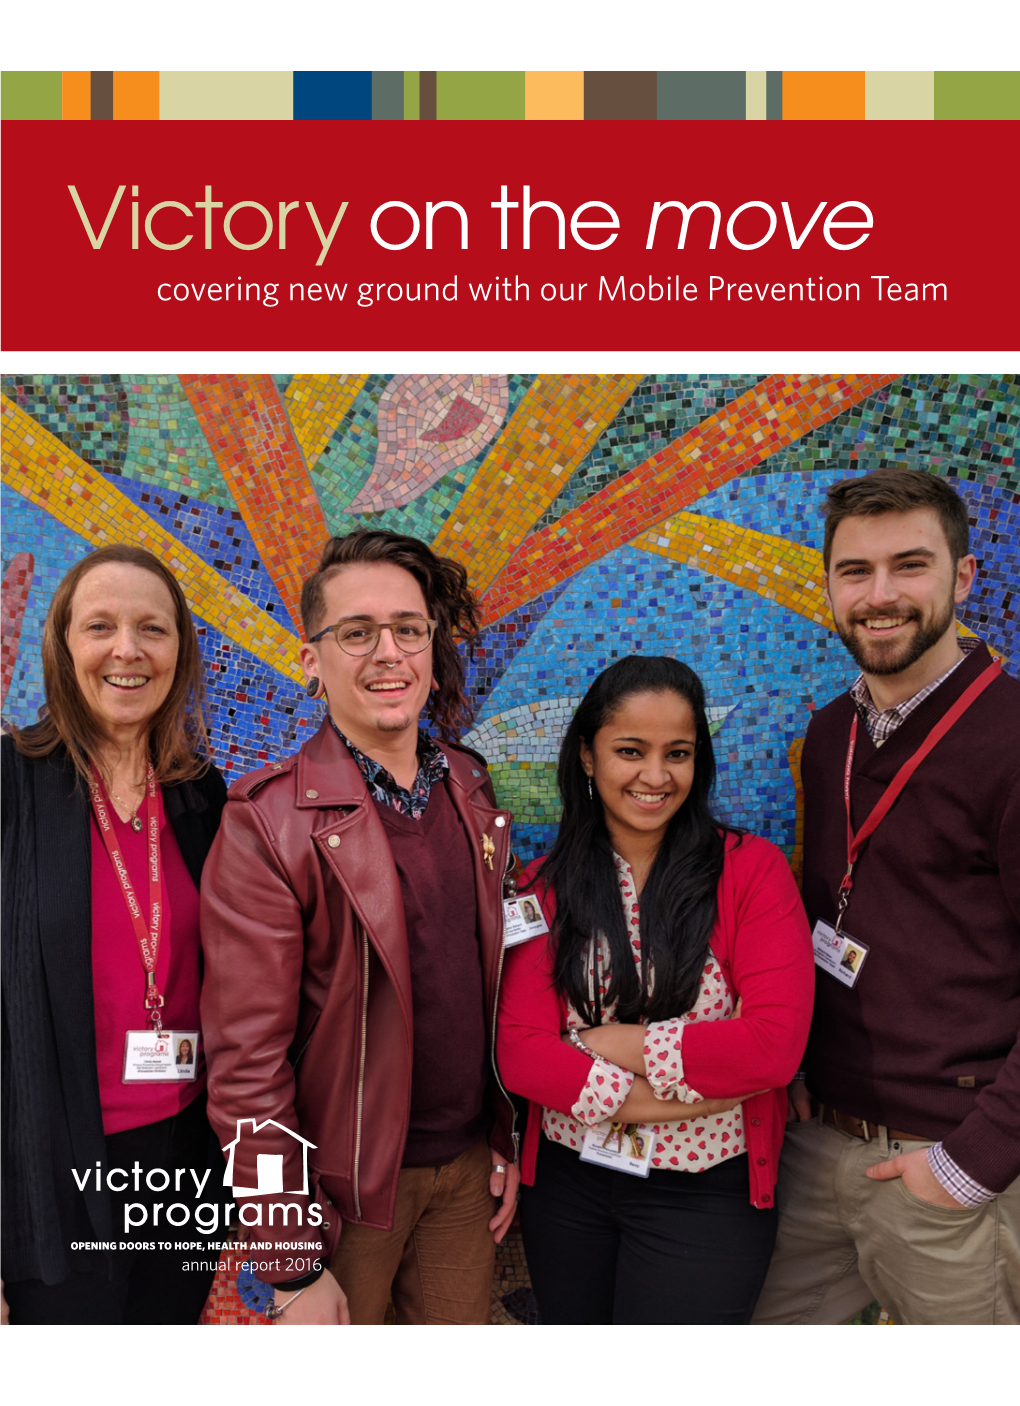 2016 Annual Report: Victory on the Move